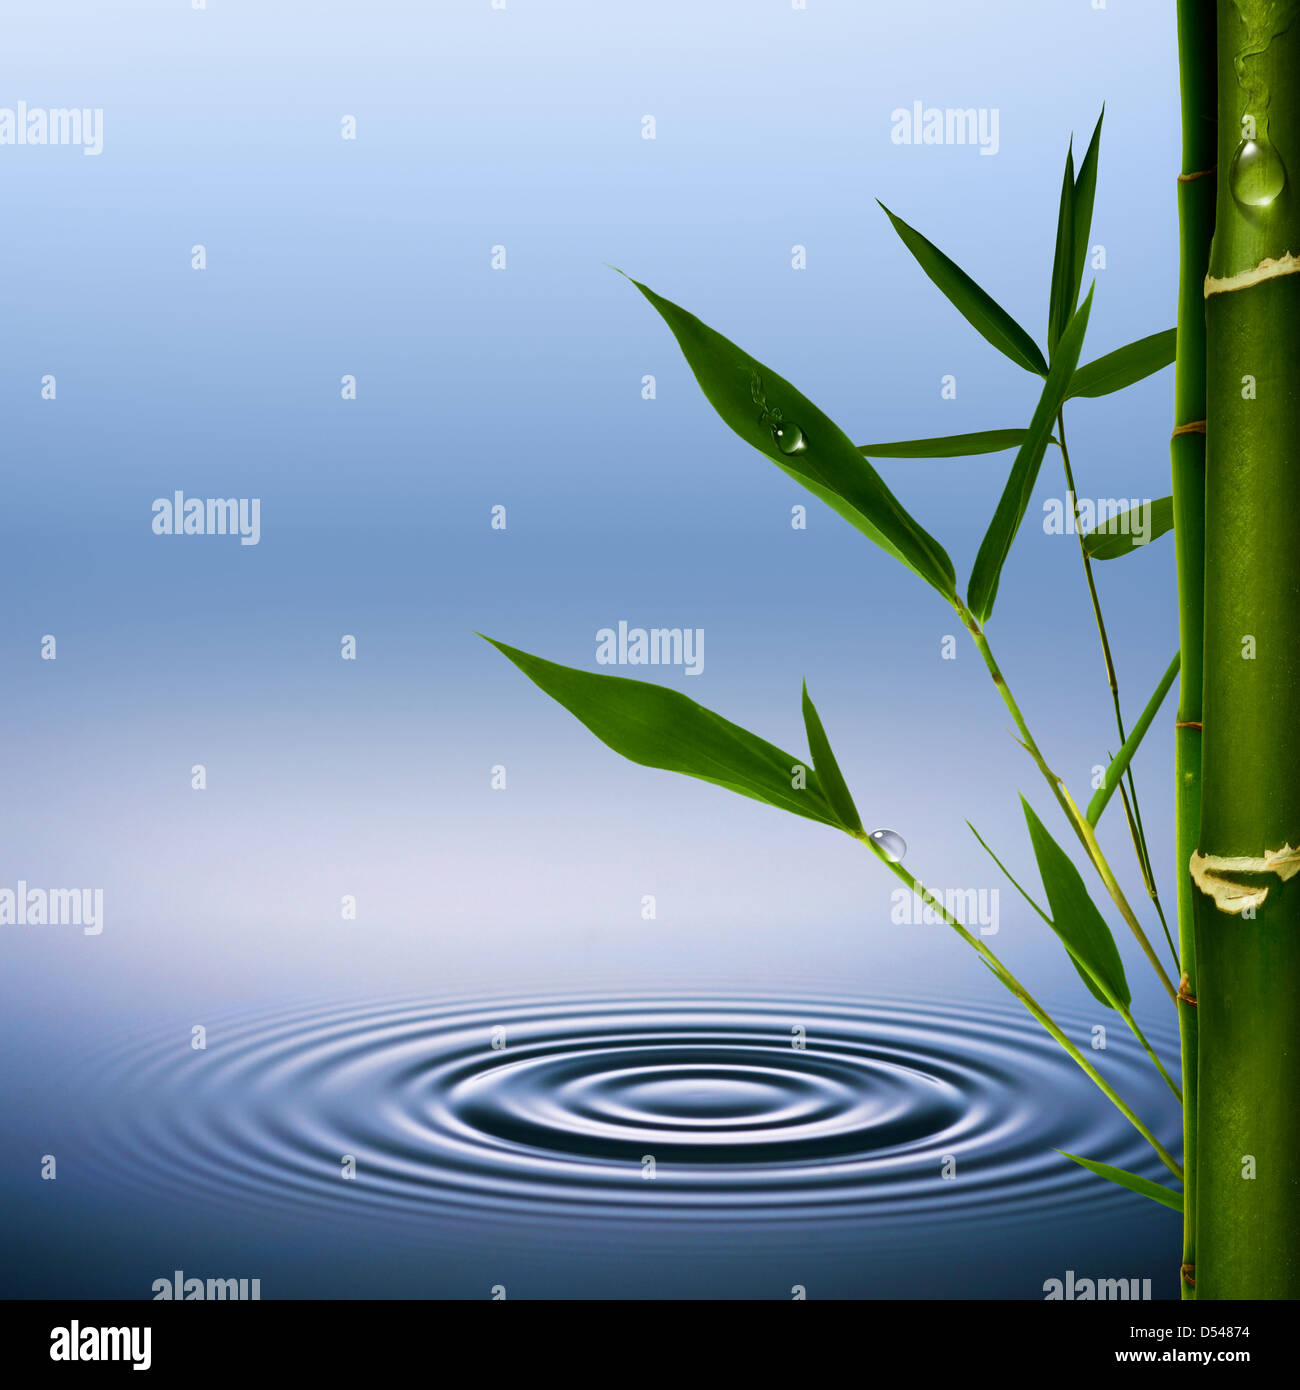 Bamboo grass with dew droplets. Abstract environmental backgrounds Stock Photo